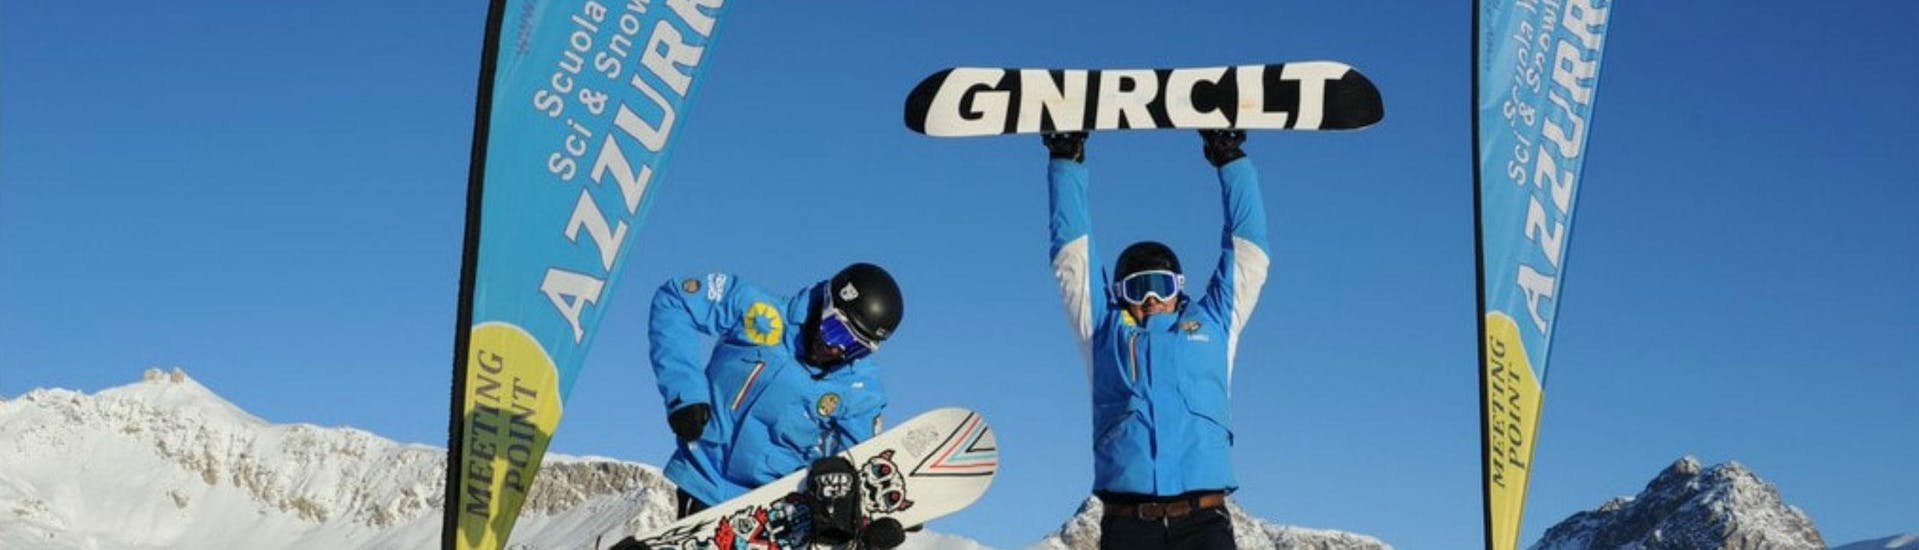 Two snowboarders are seemingly excited about their Private Snowboarding Lessons for Kids & Adults - All Levels with the ski school Scuola di Sci Azzurra Livigno.